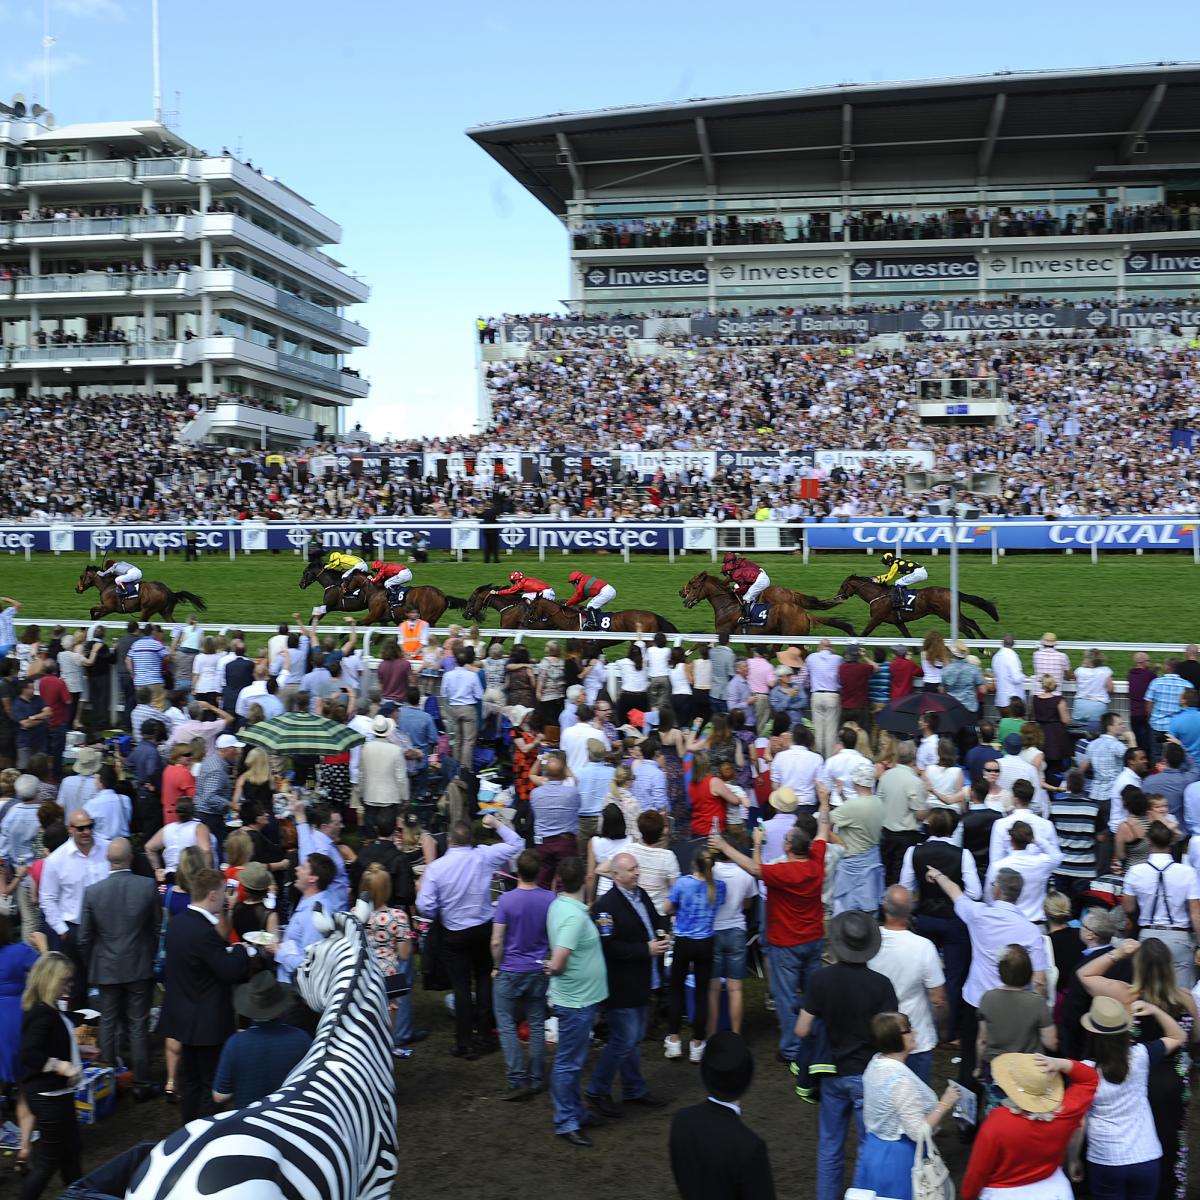 Epsom Derby 2014 Results: Winner, Payouts and Order of Finish | News ...